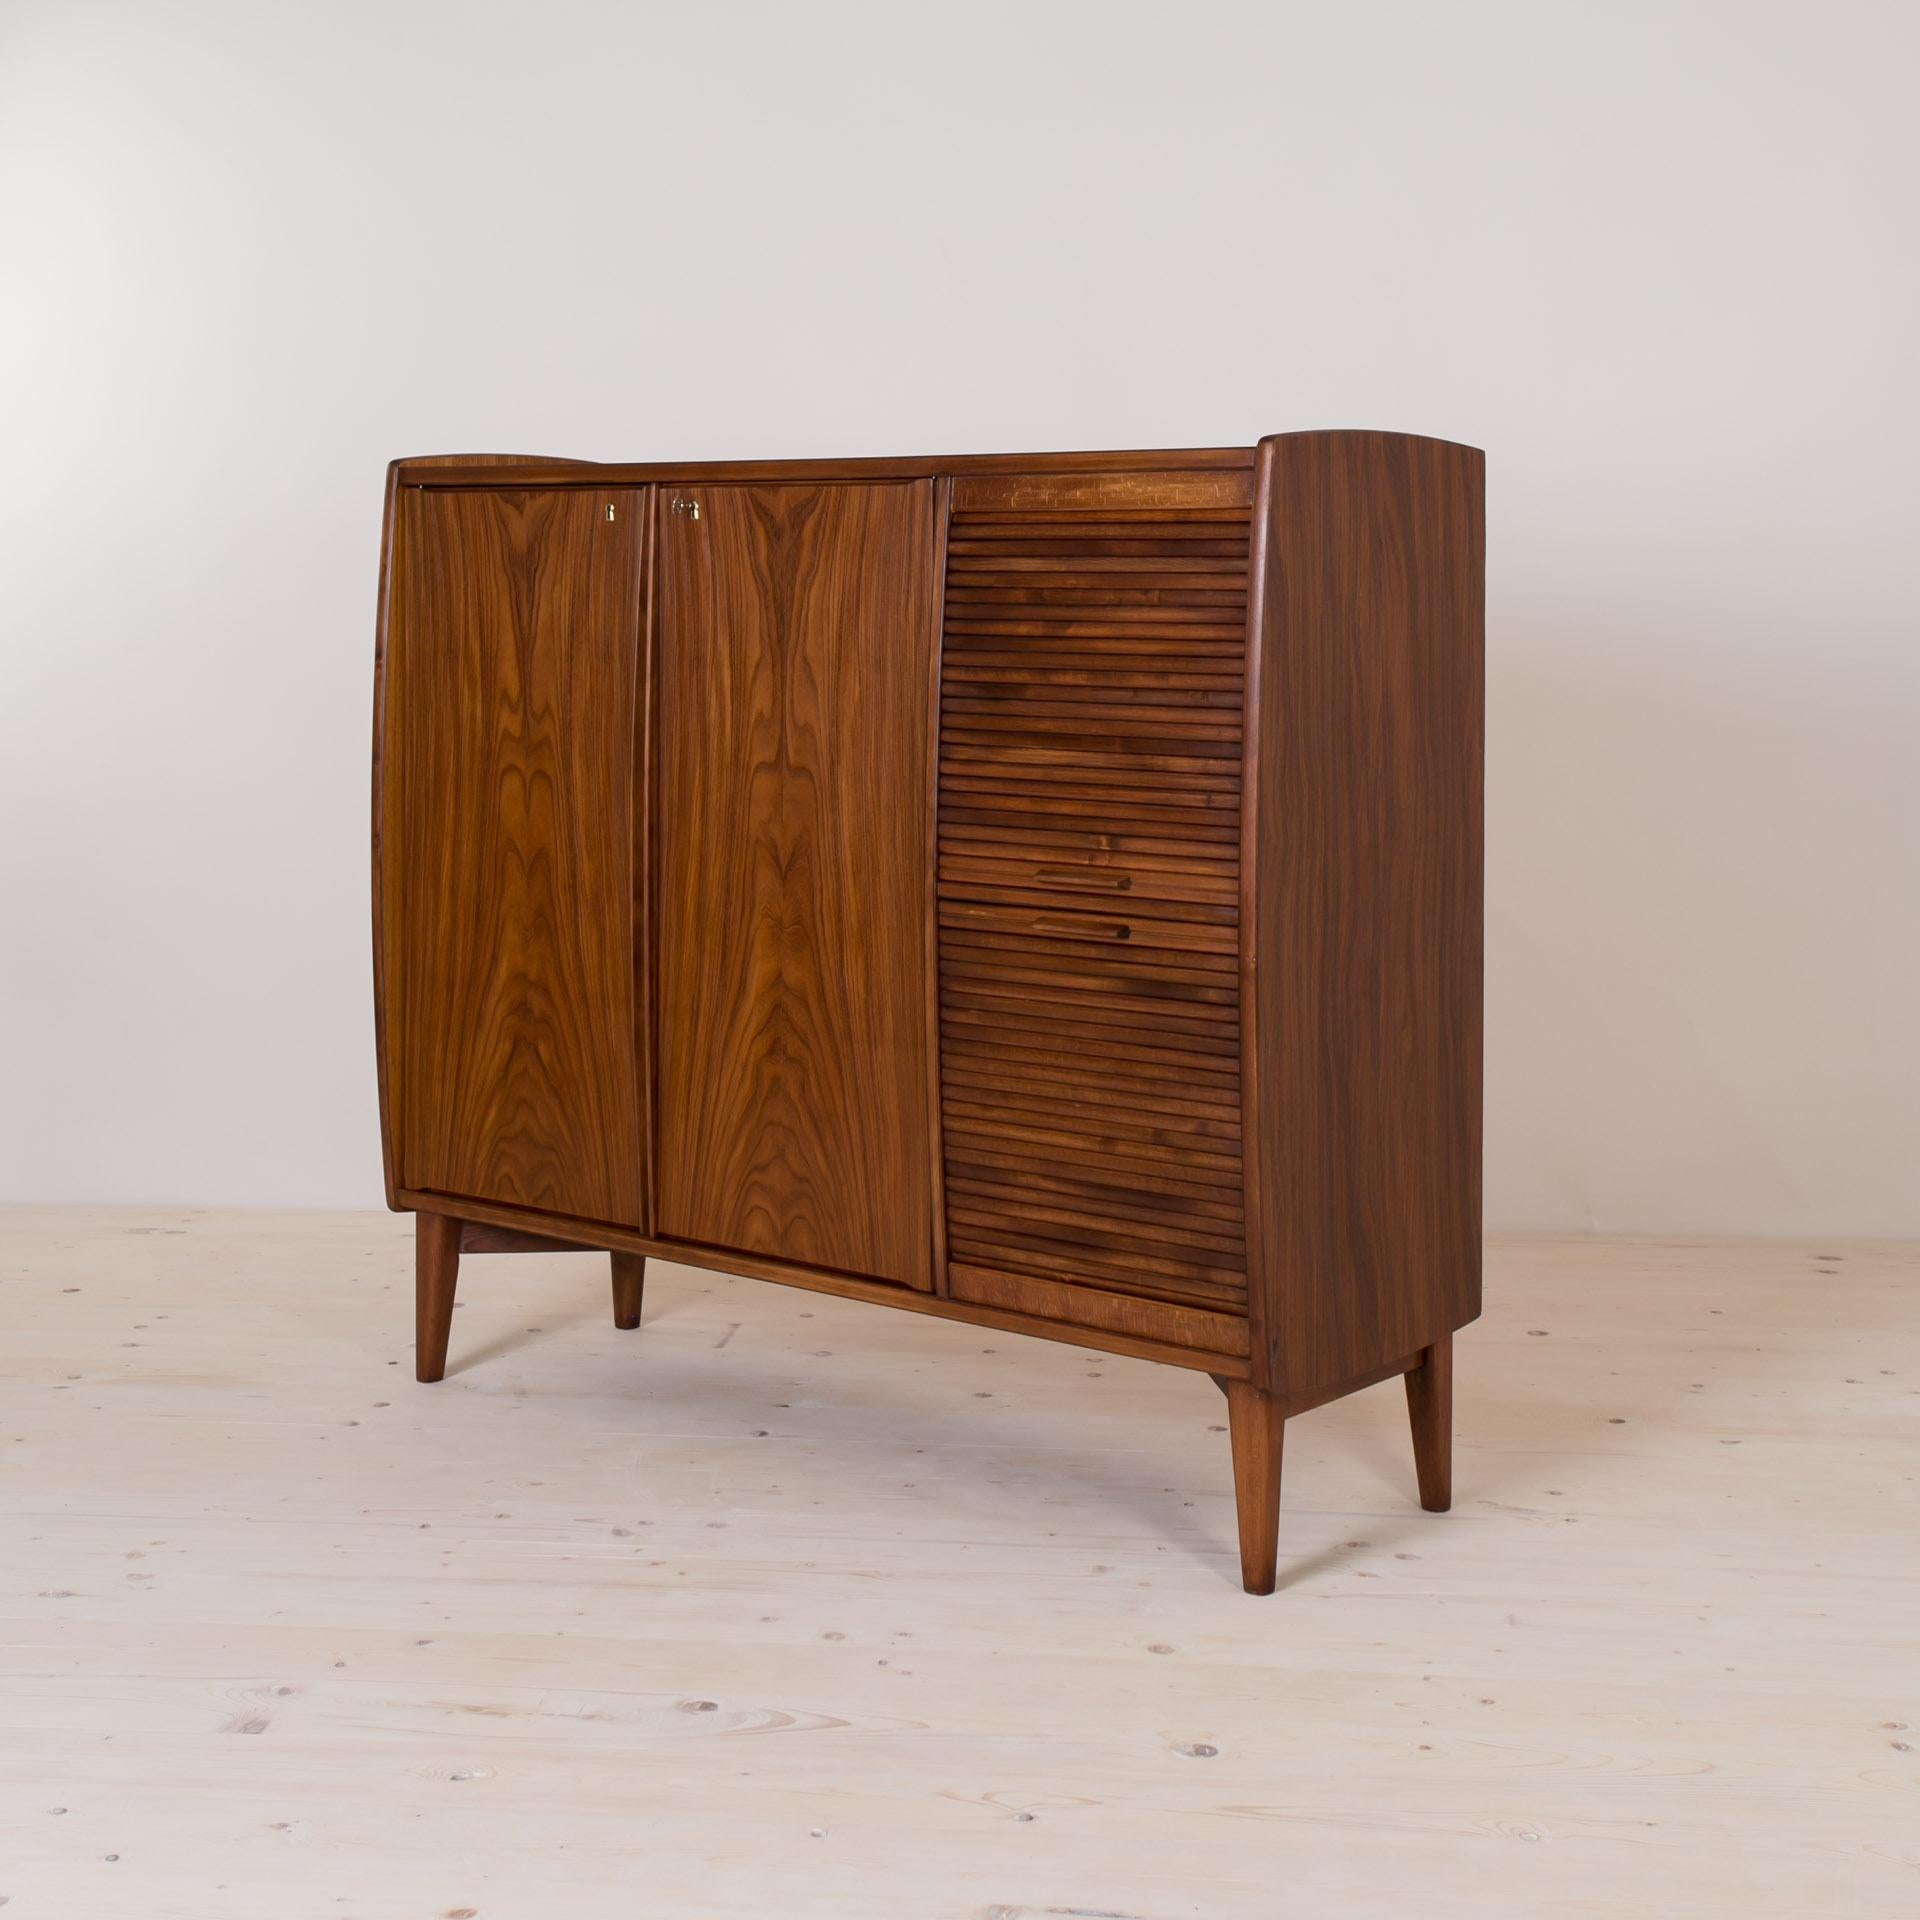 Teak Sideboard or Bar Cabinet by Alfred Sand for FLEKKEFJORD, Norway, 1960s In Good Condition In Wrocław, Poland